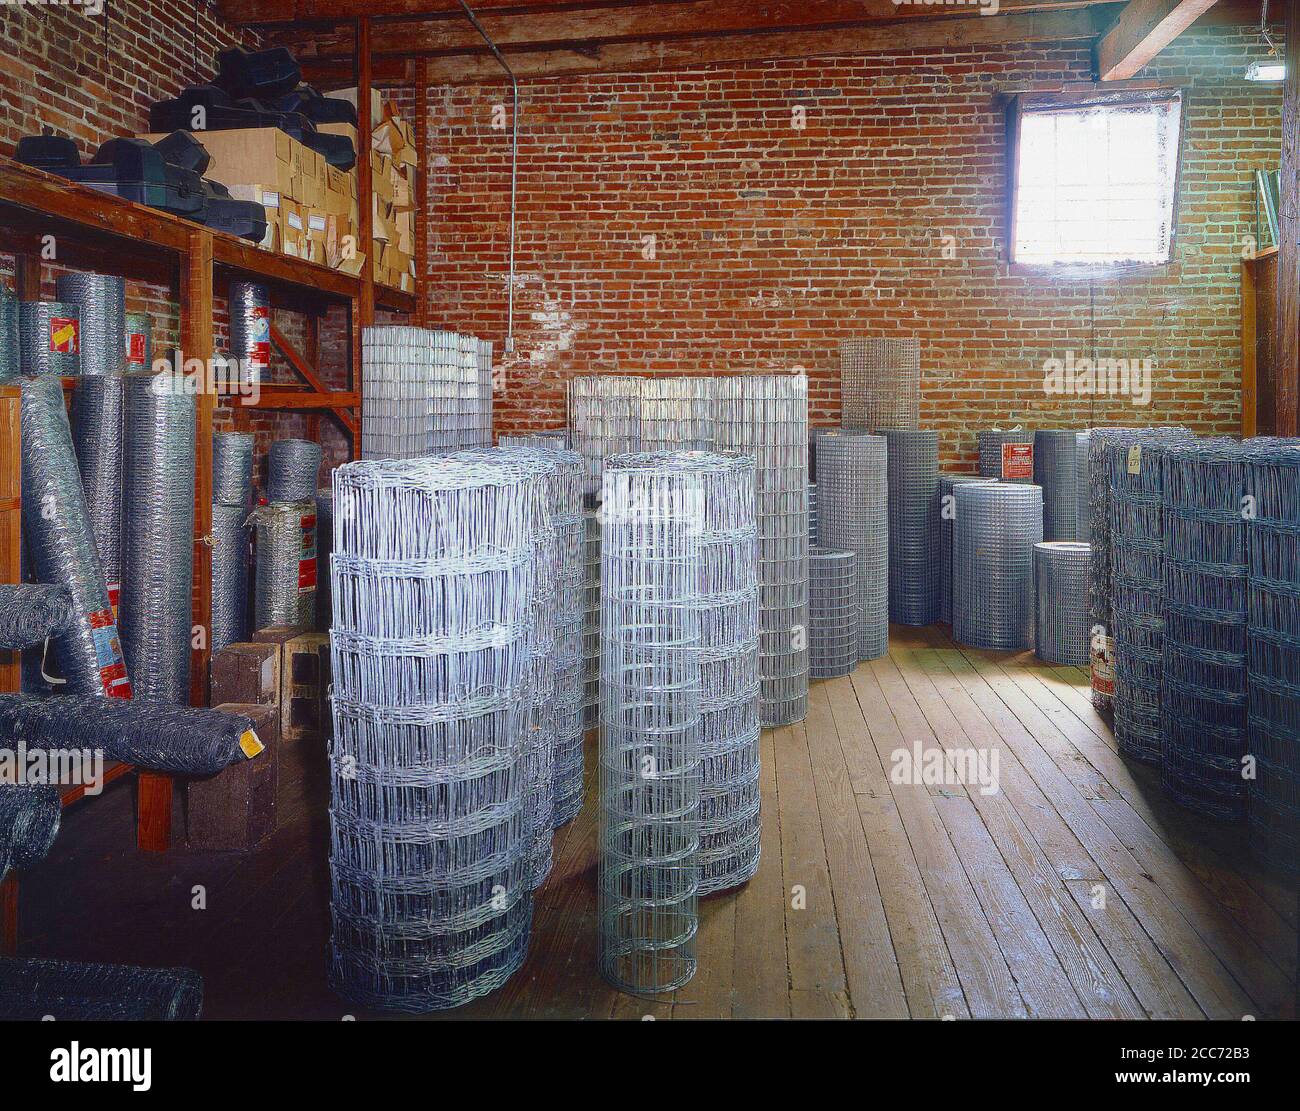 Feed Store interior of fencing materials with sunlight streaming through the window Stock Photo